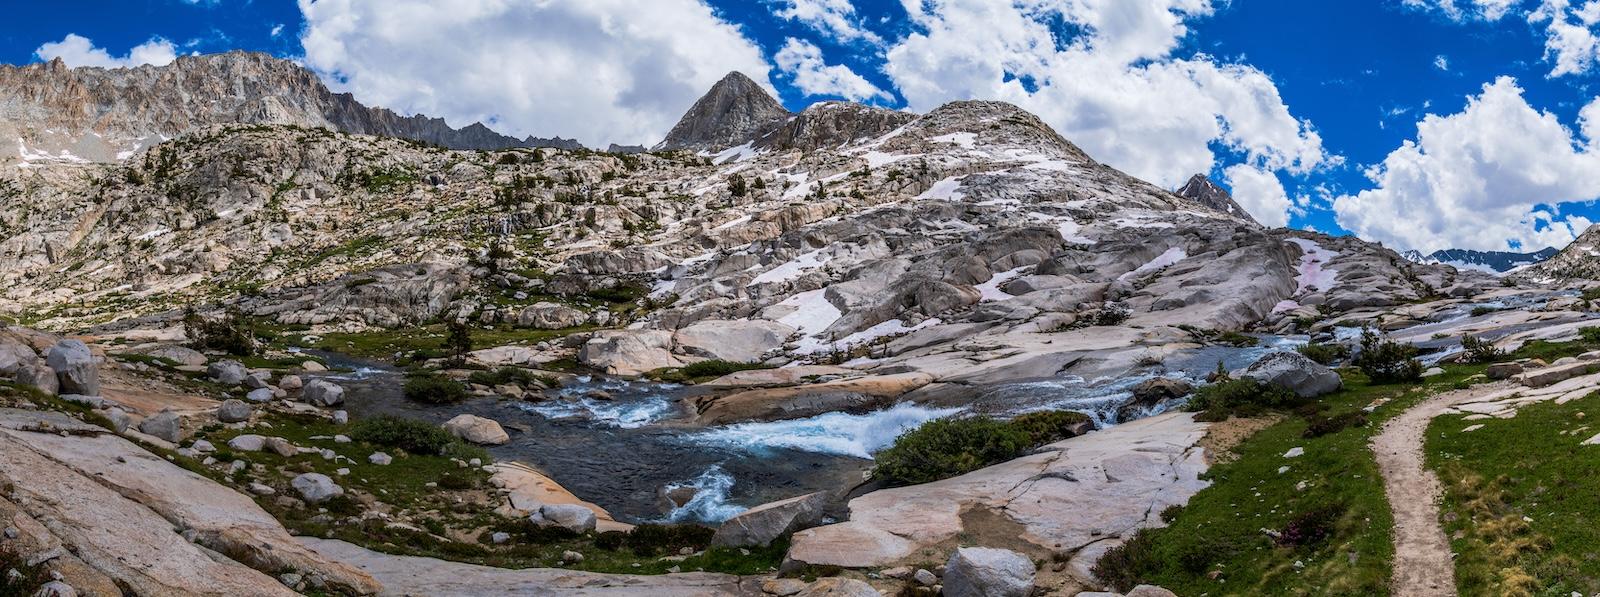 Alpine creek in the Evolution Basin of Kings Canyon National Park in the Sierras